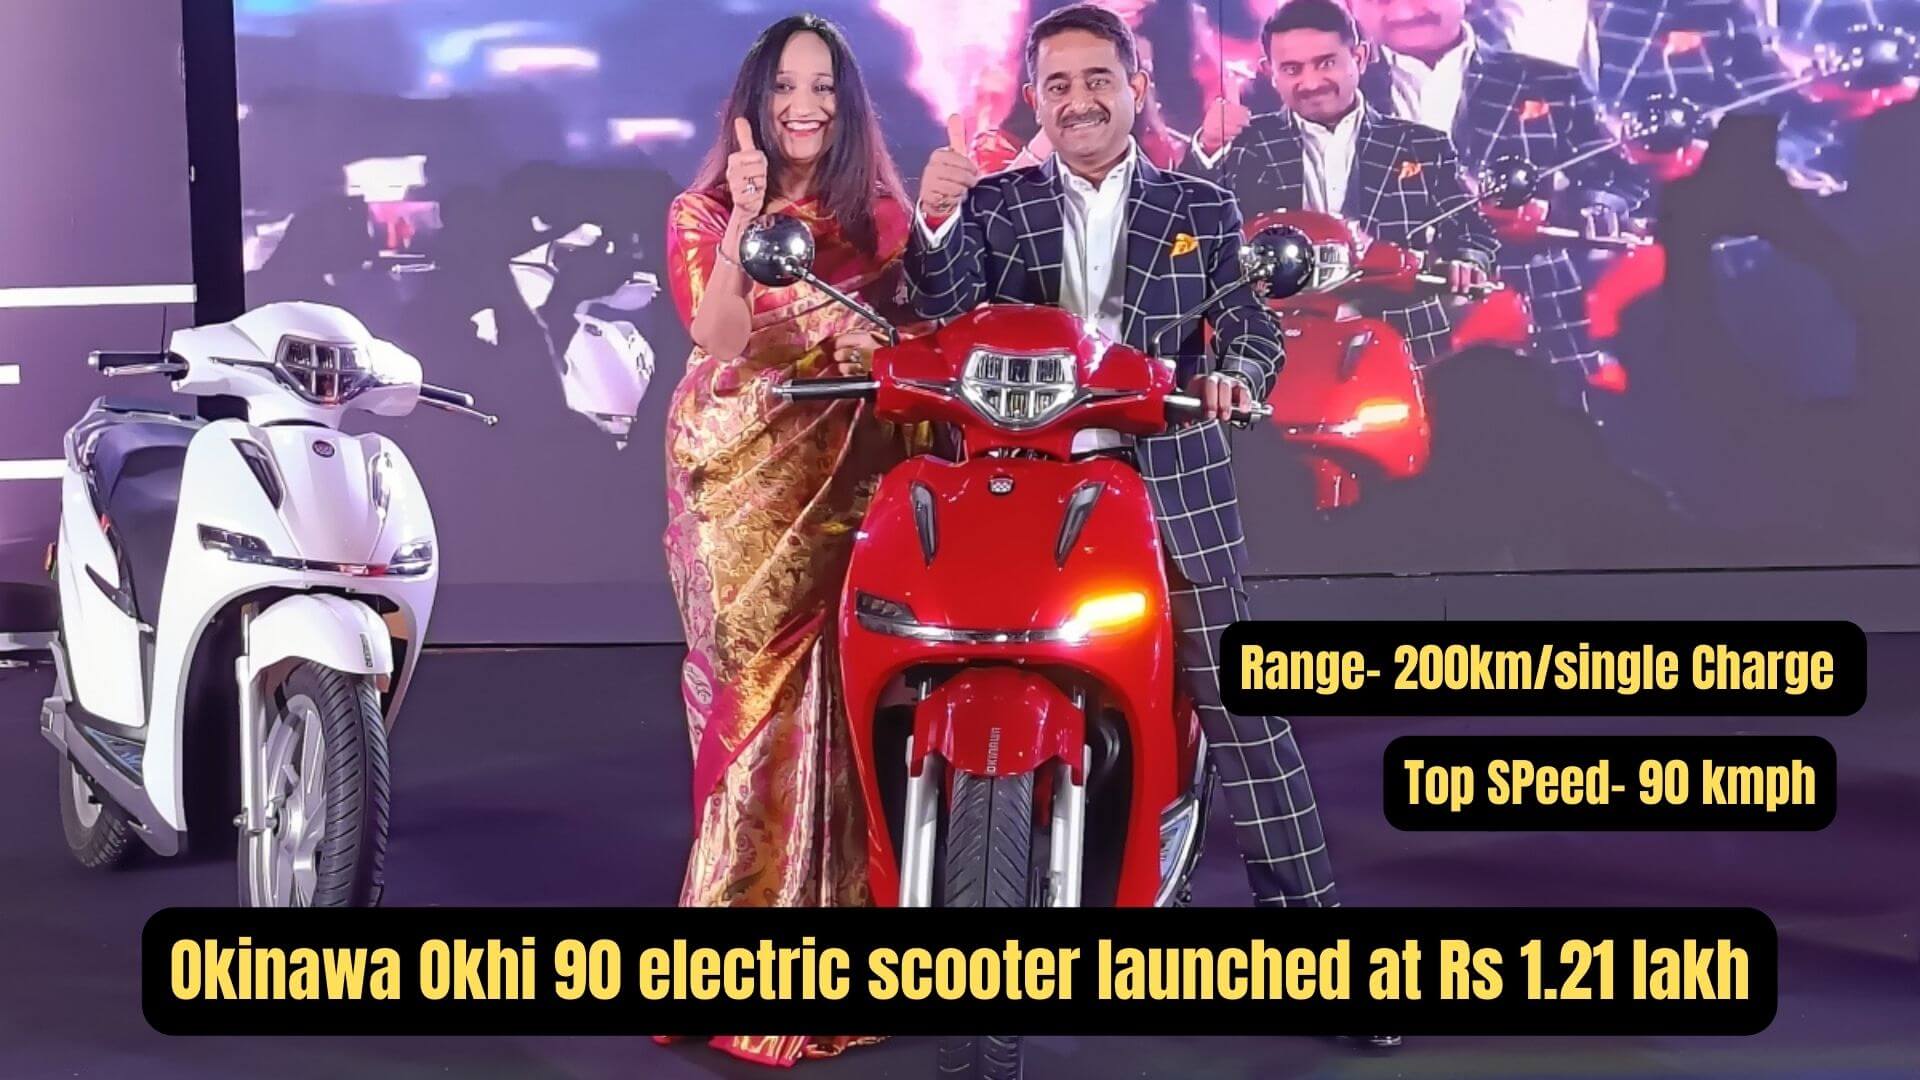 https://e-vehicleinfo.com/okinawa-okhi-90-electric-scooter-price-range-and-top-speed/